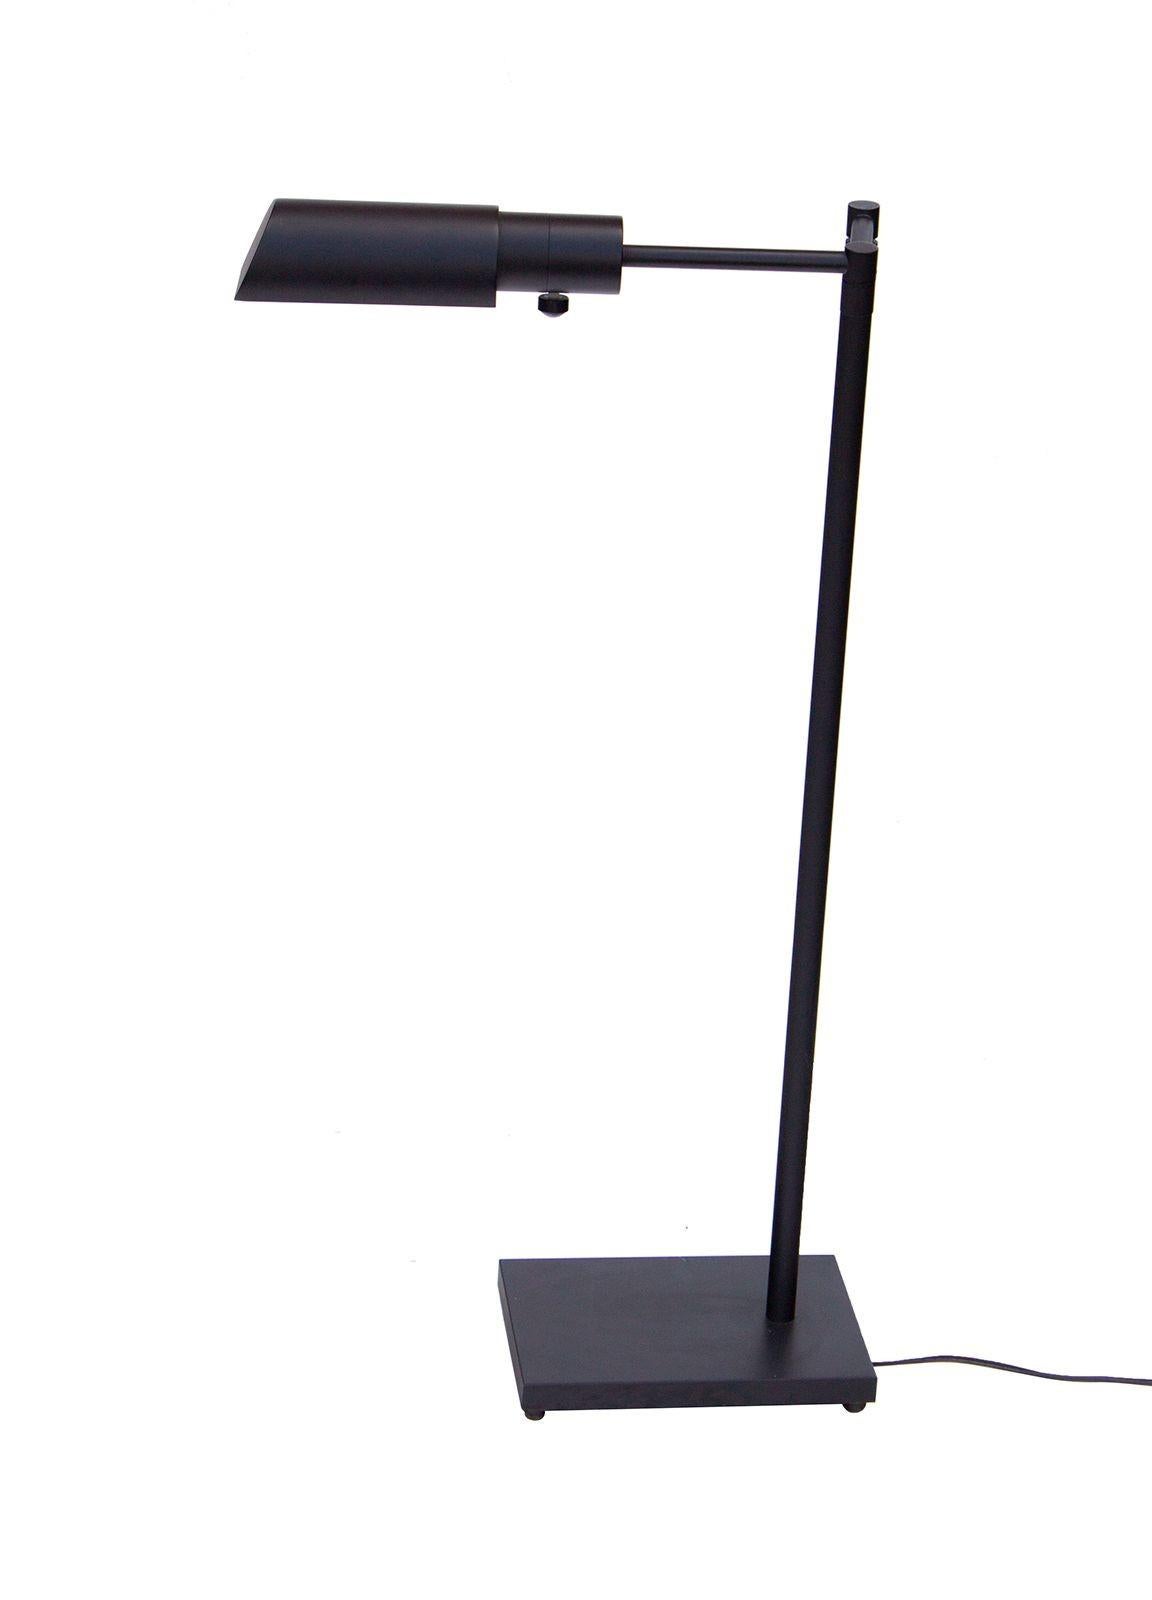 Taiwan, 1990s
Library style adjustable swing arm floor lamp in black finish. This lamp is a lower height than many in this style- where many library style lamps have a telescoping height, this one does not telescope. Great for a reading chair. Made